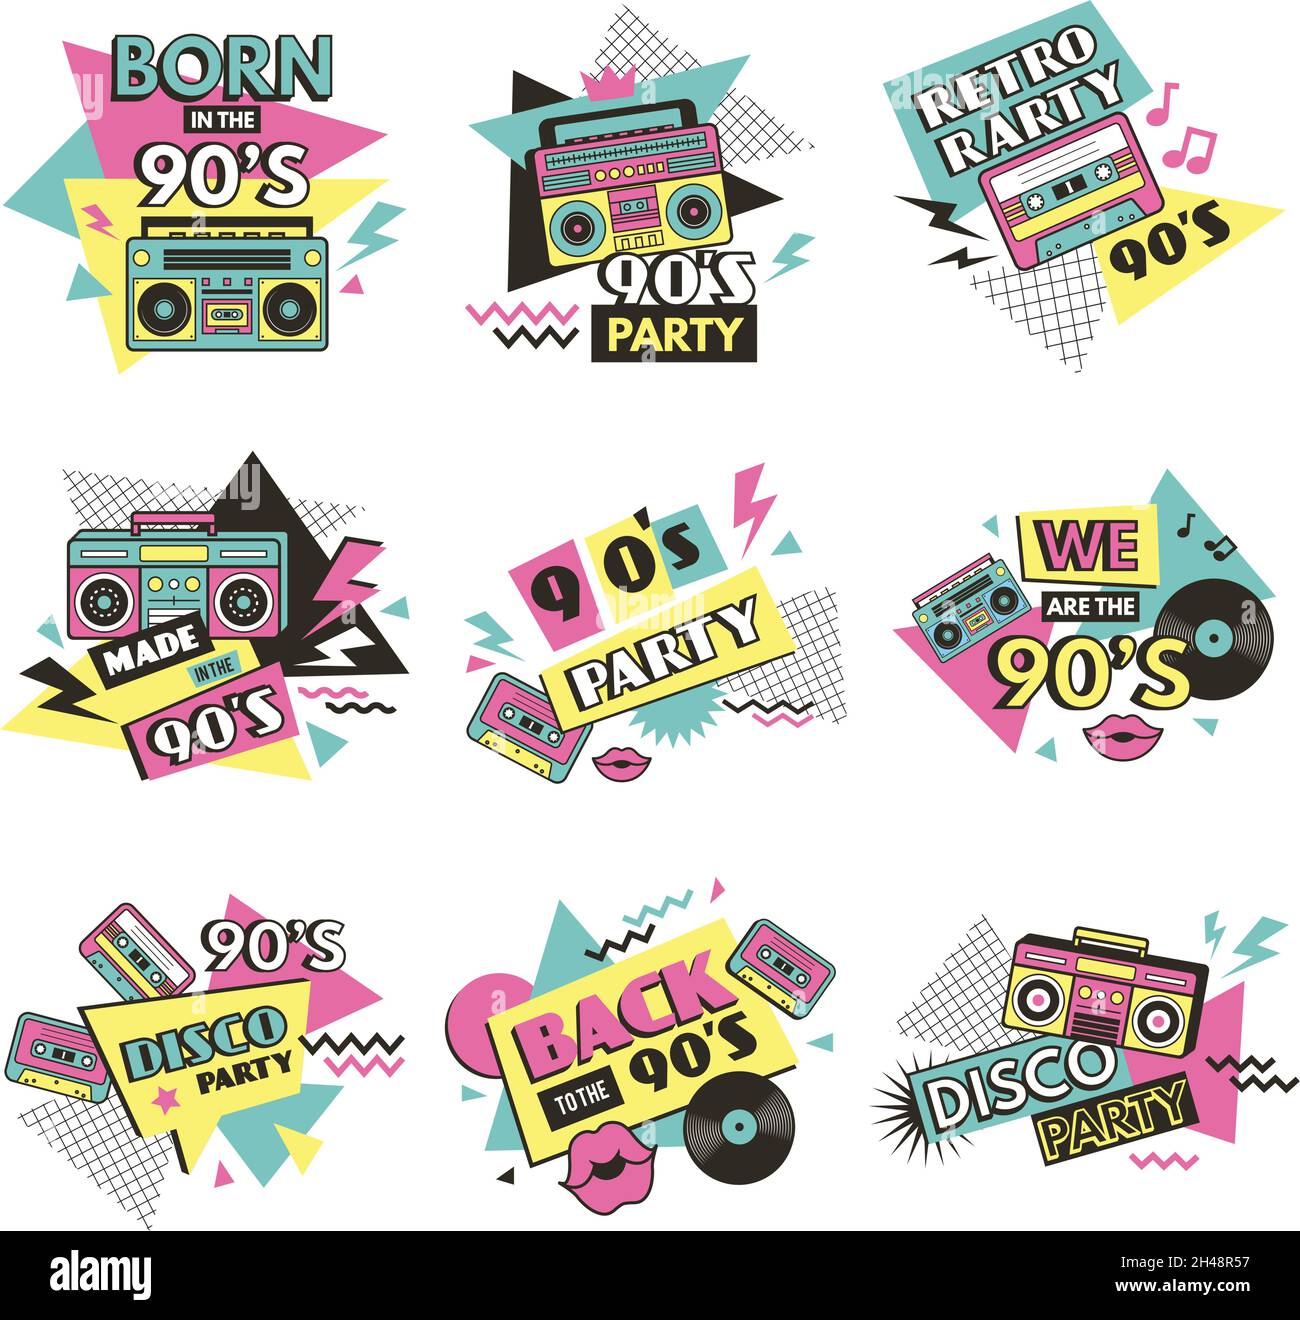 90s labels. Vintage fashioned labels for clothes retro style elements of pop music of 80s musical boombox radio recent vector pictures set Stock Vector